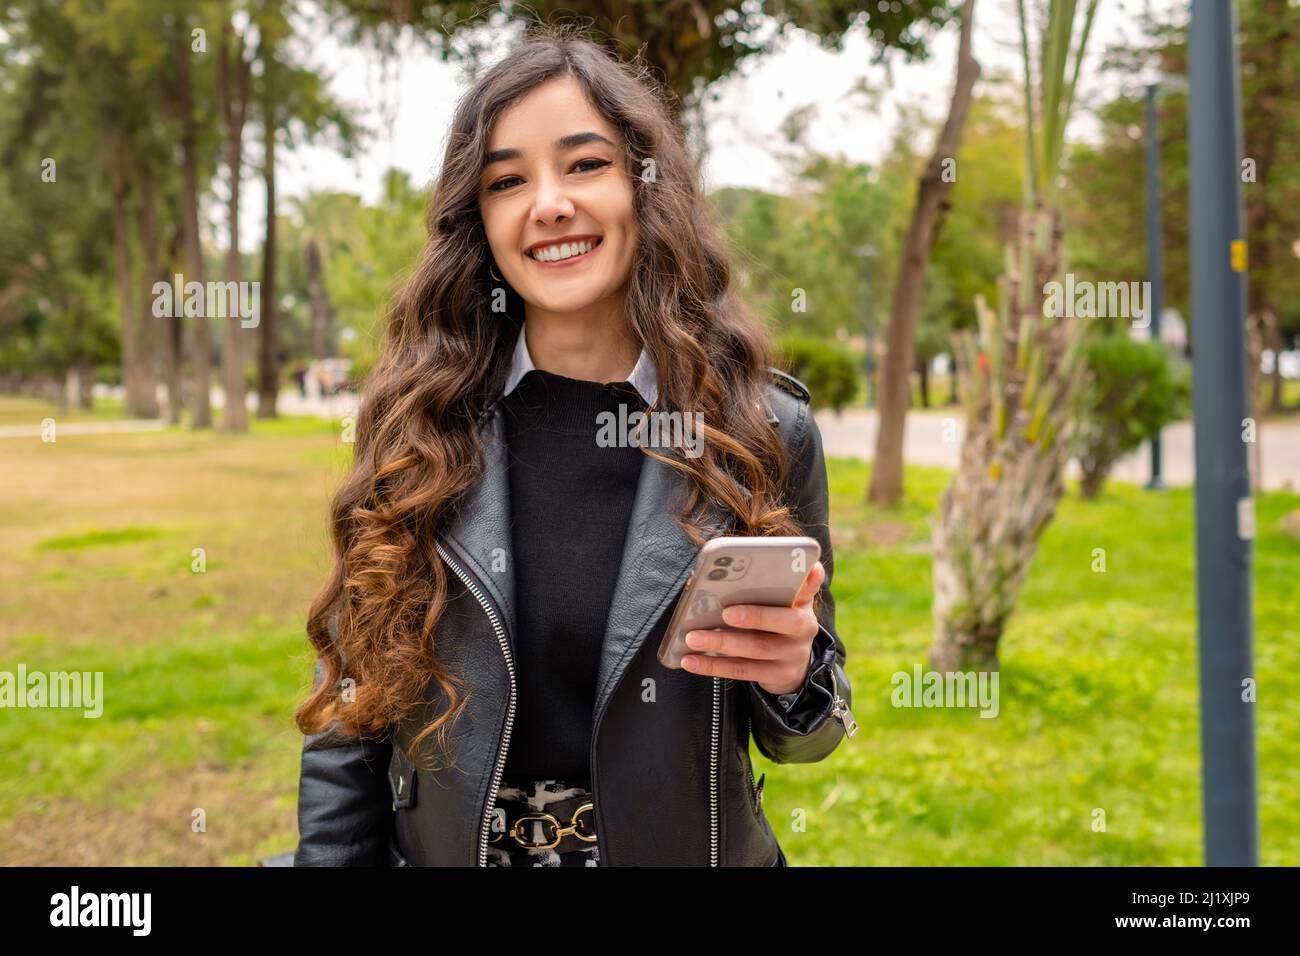 Smiling young lady, business woman posing for the camera and holding her phone, she is spending her time in an outdoor park and smiling, wavy hair and Stock Photo